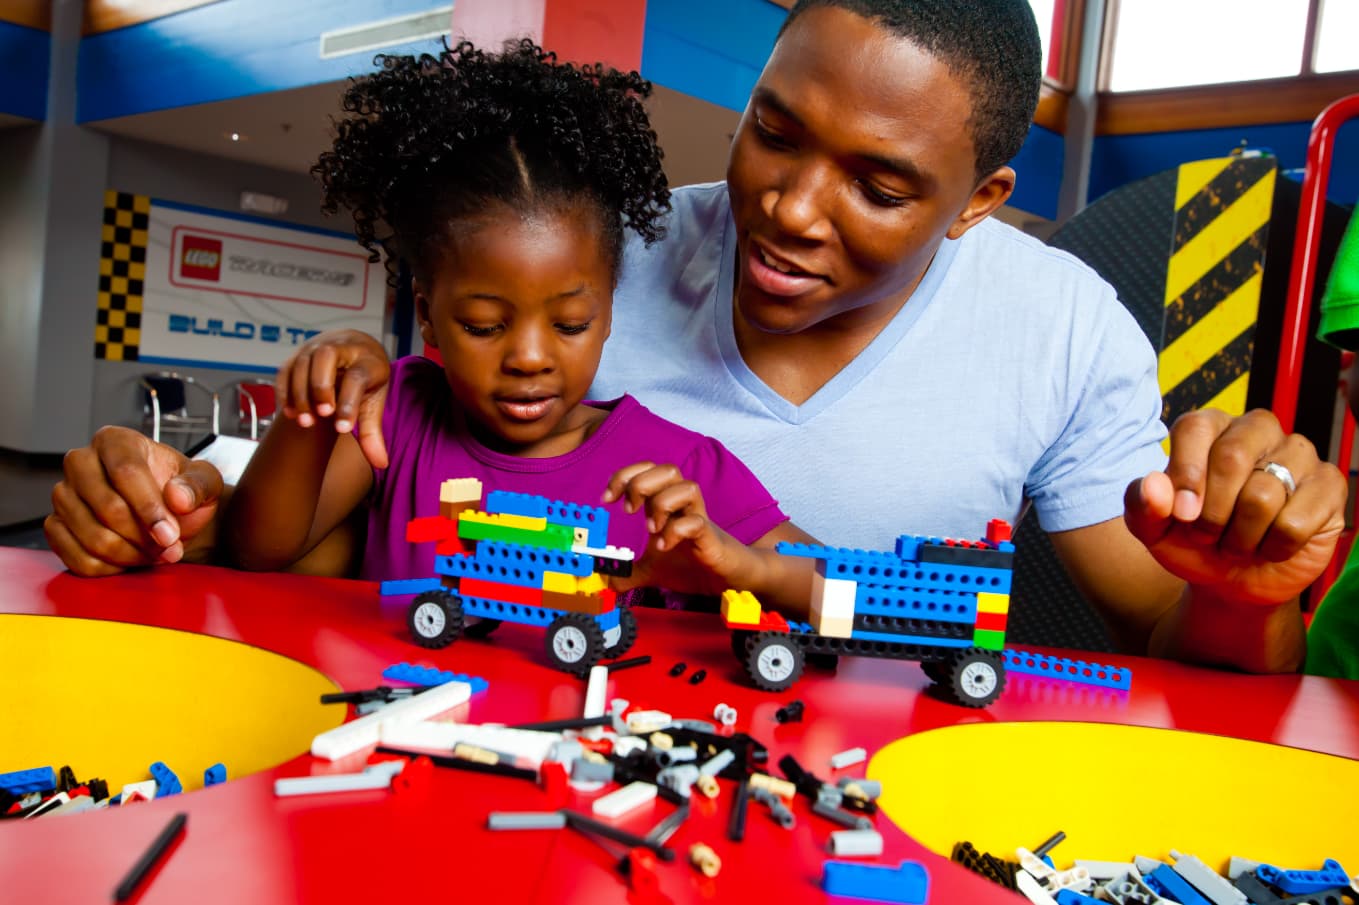 7 Things to do at LEGOLAND New York when it rains